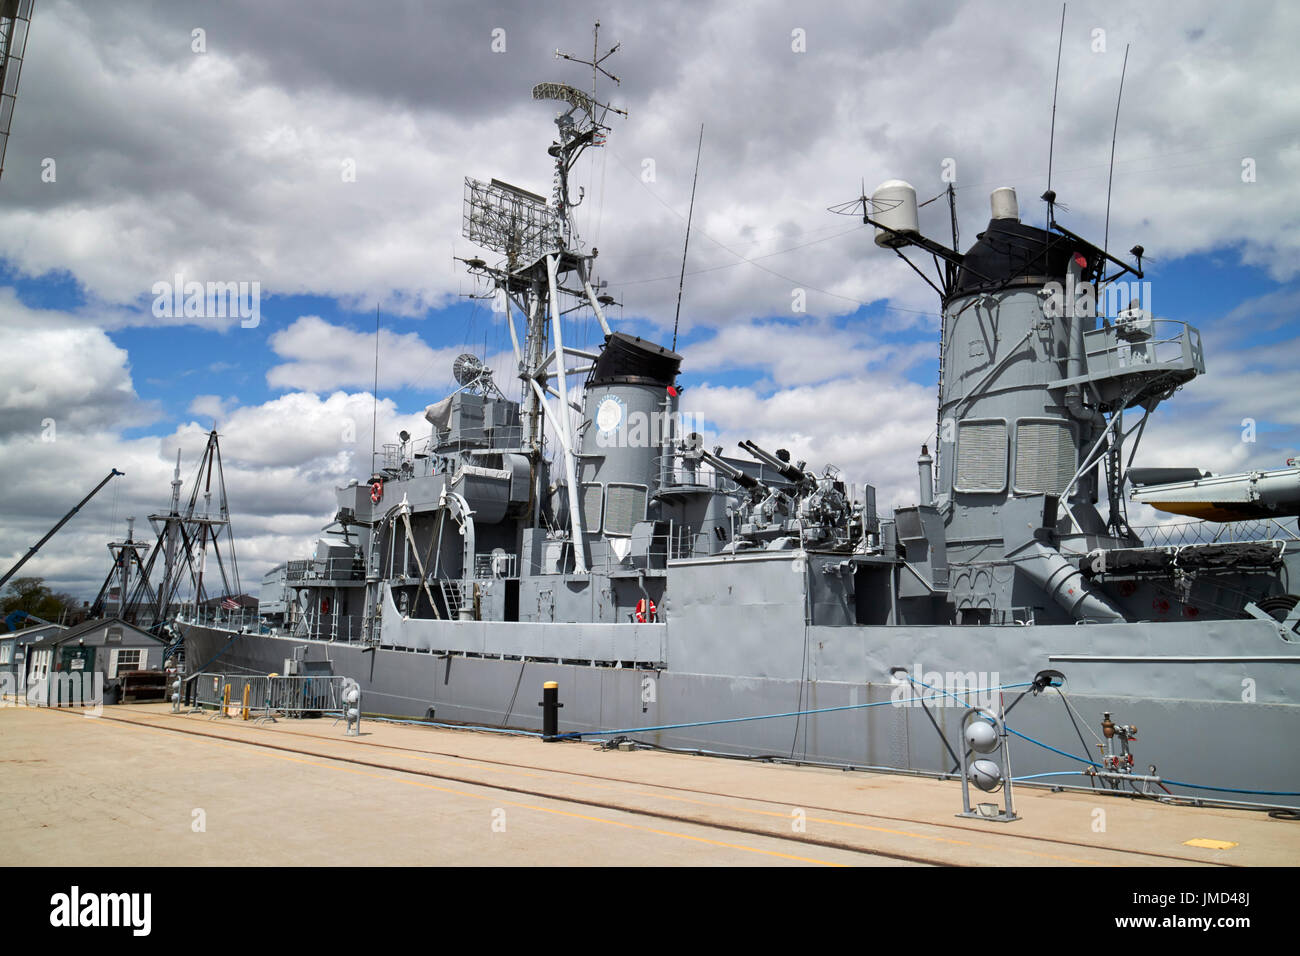 Uss cassin young à Charlestown Navy Yard Boston USA Banque D'Images